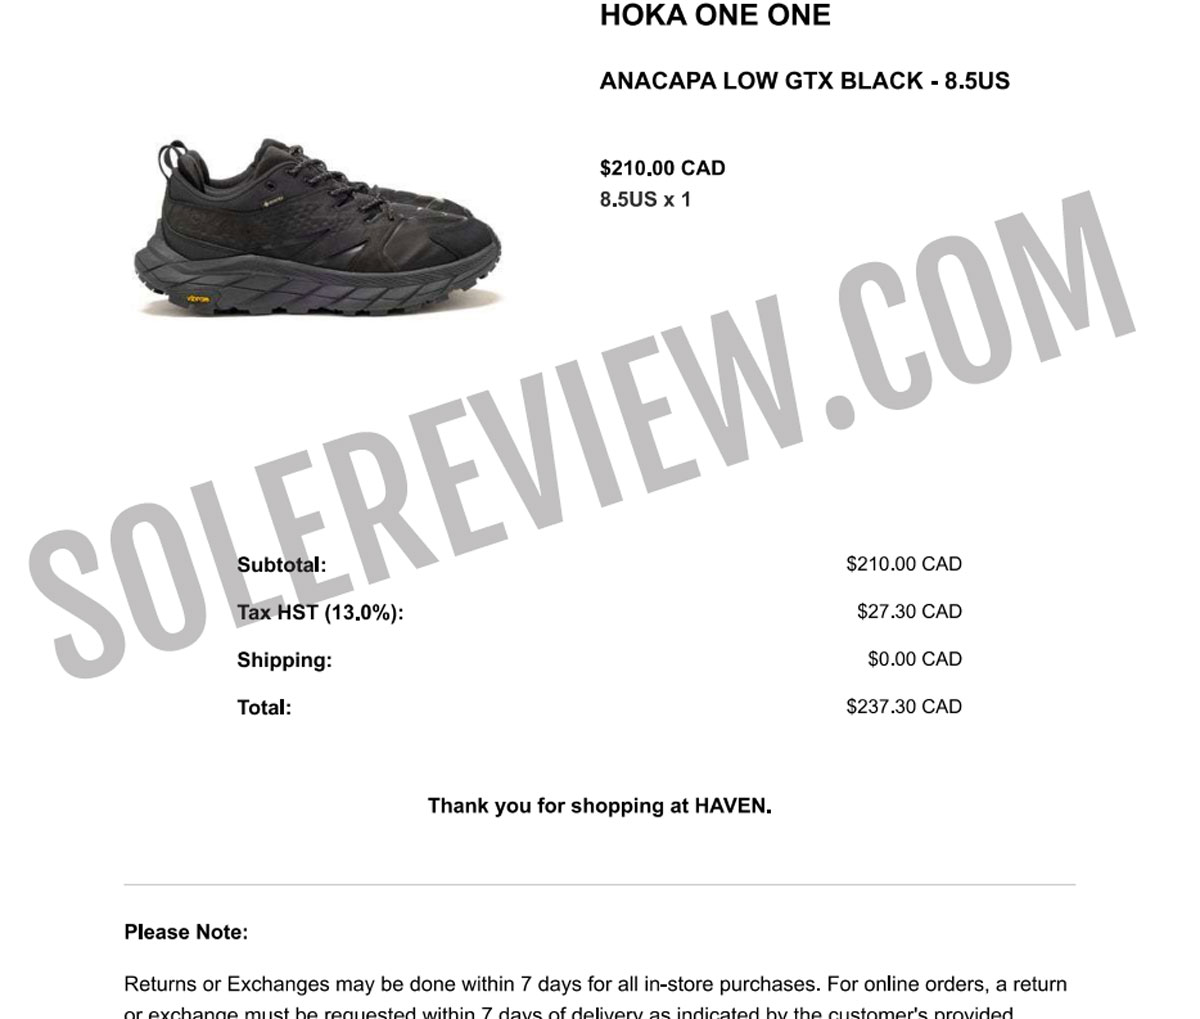 Proof of purchase for the Hoka Anacapa Low GTX.